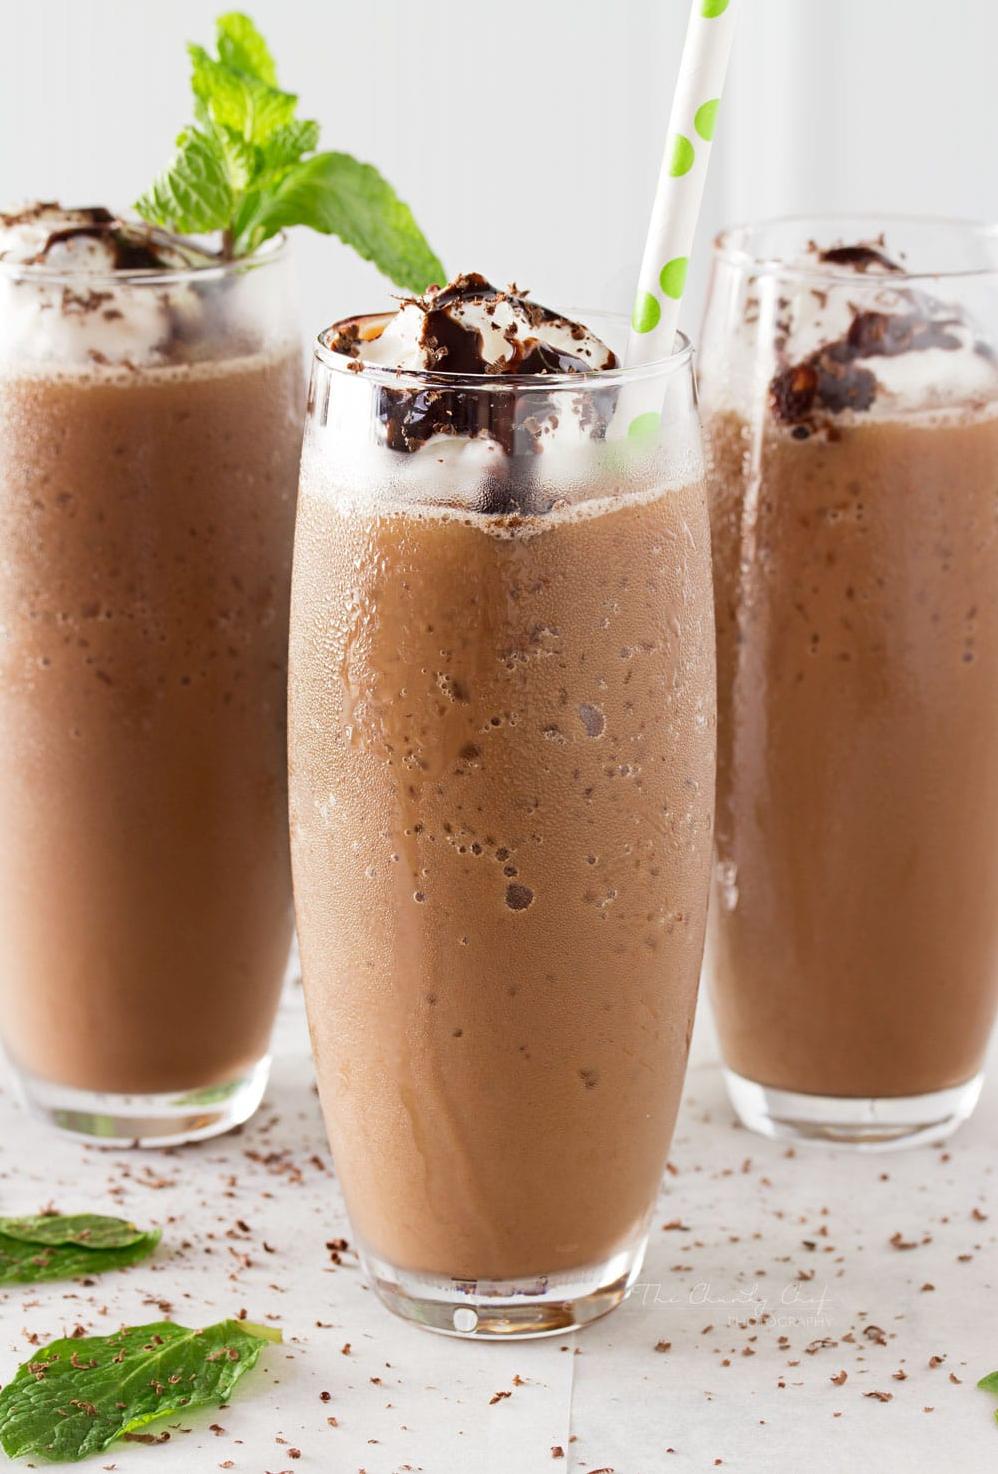  Rich, chocolatey goodness in every sip.